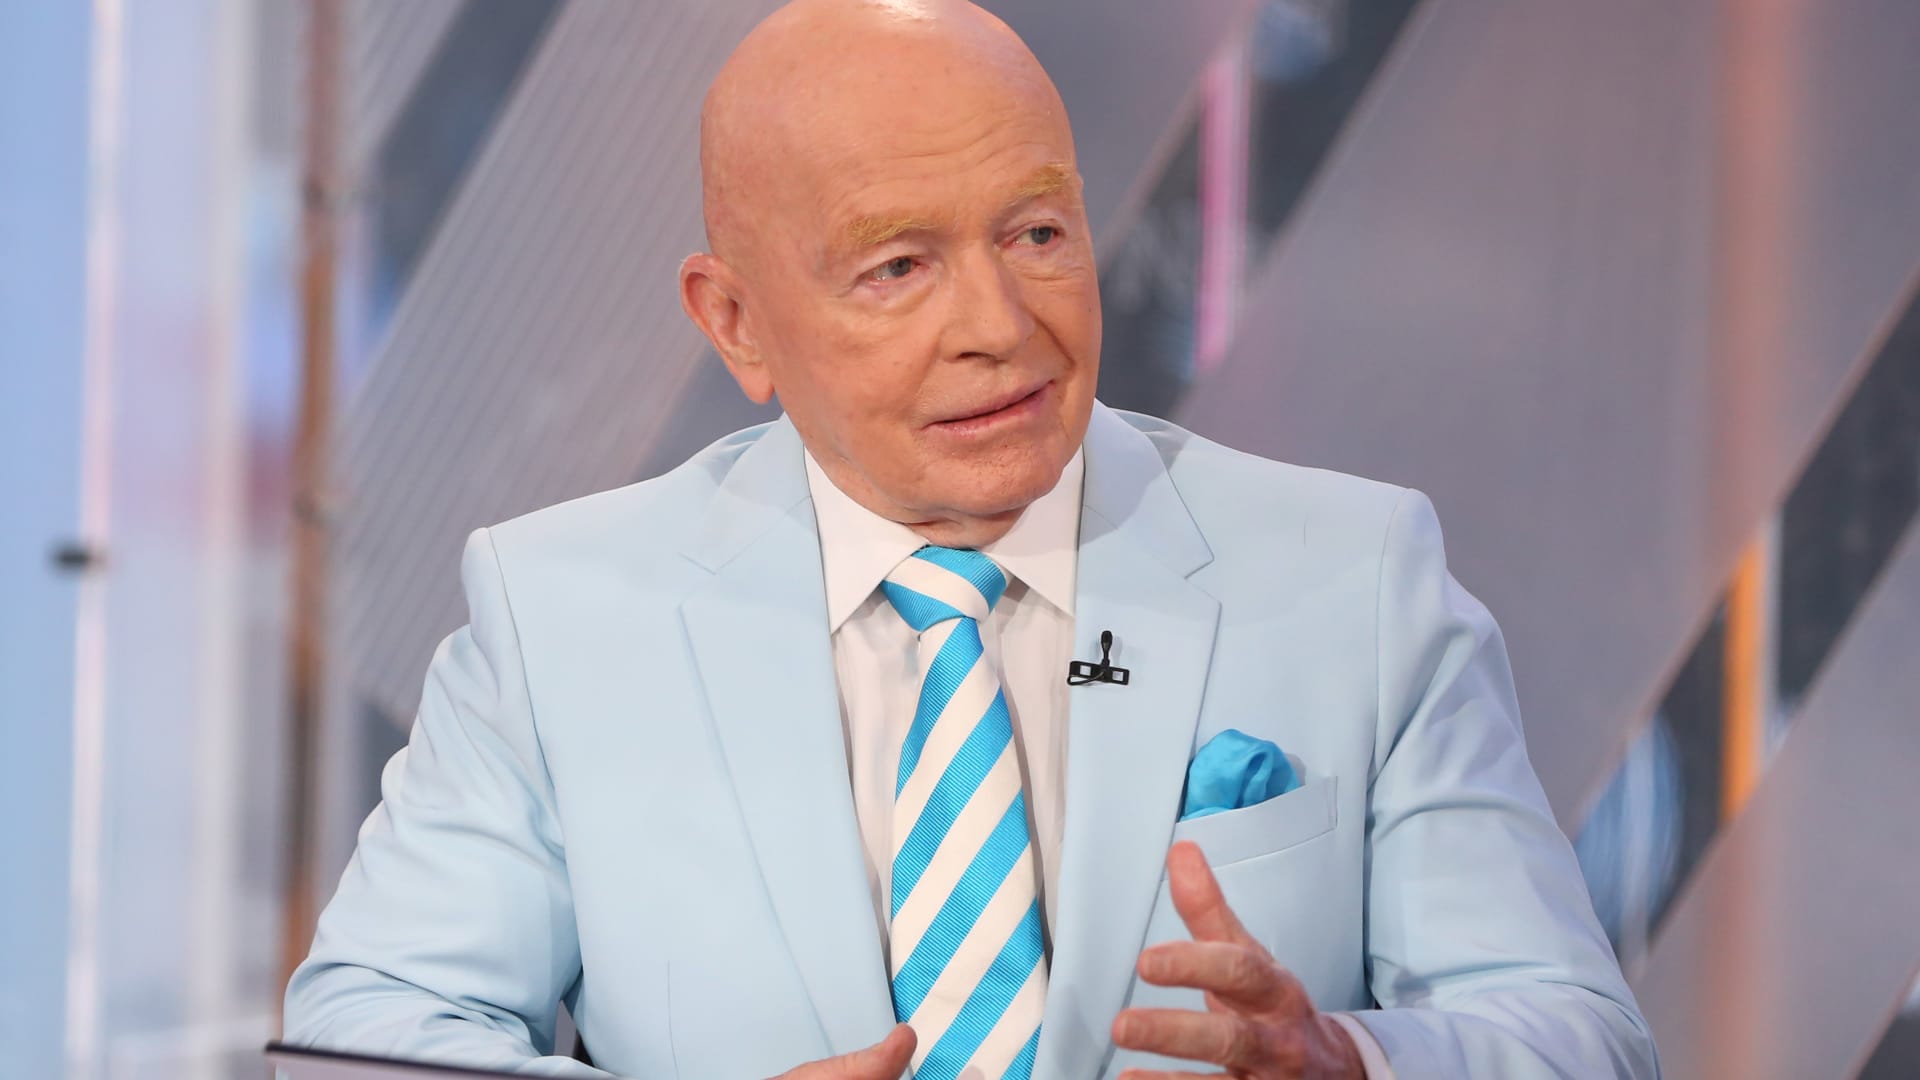 'Gold is the way to go' as interest rates fall, says Mark Mobius